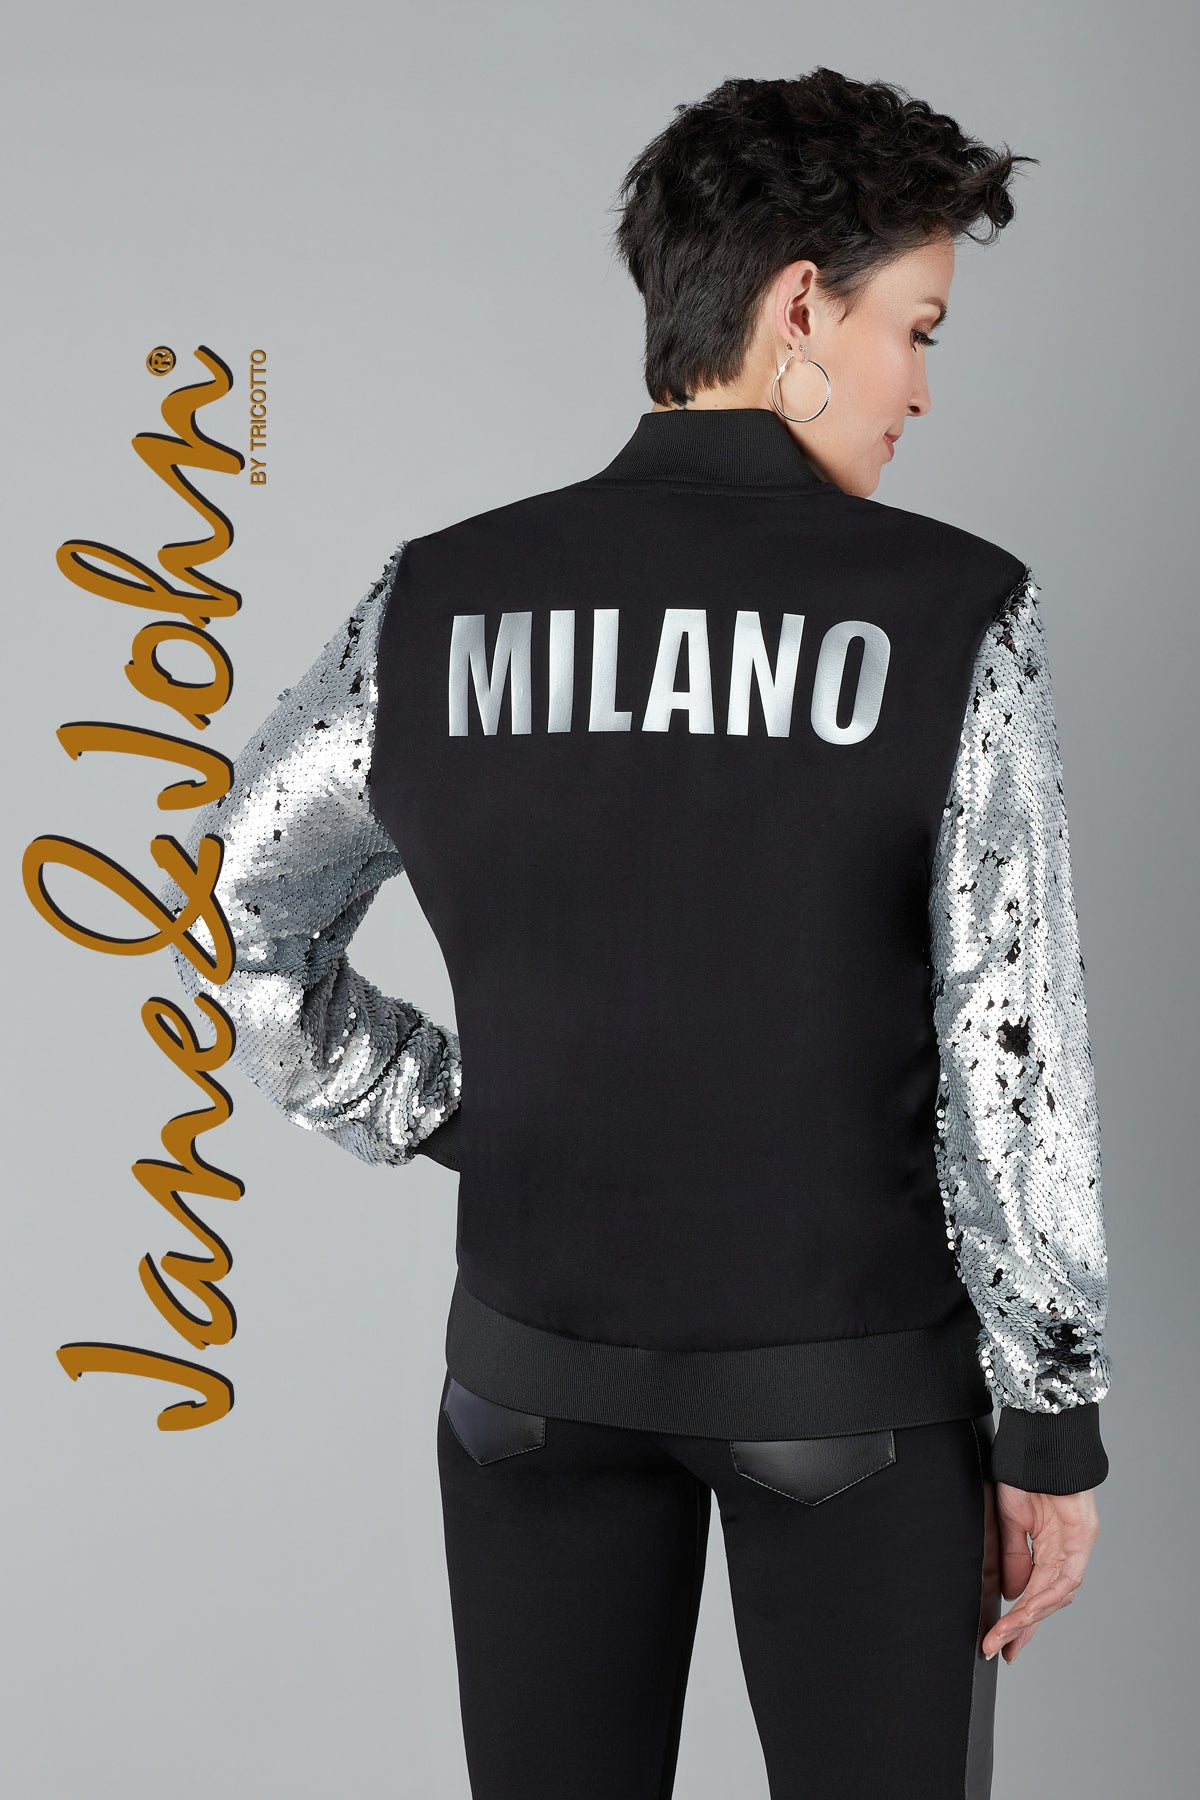 Two Tricotto (Jane & John) black mesh jackets, one with gold trim